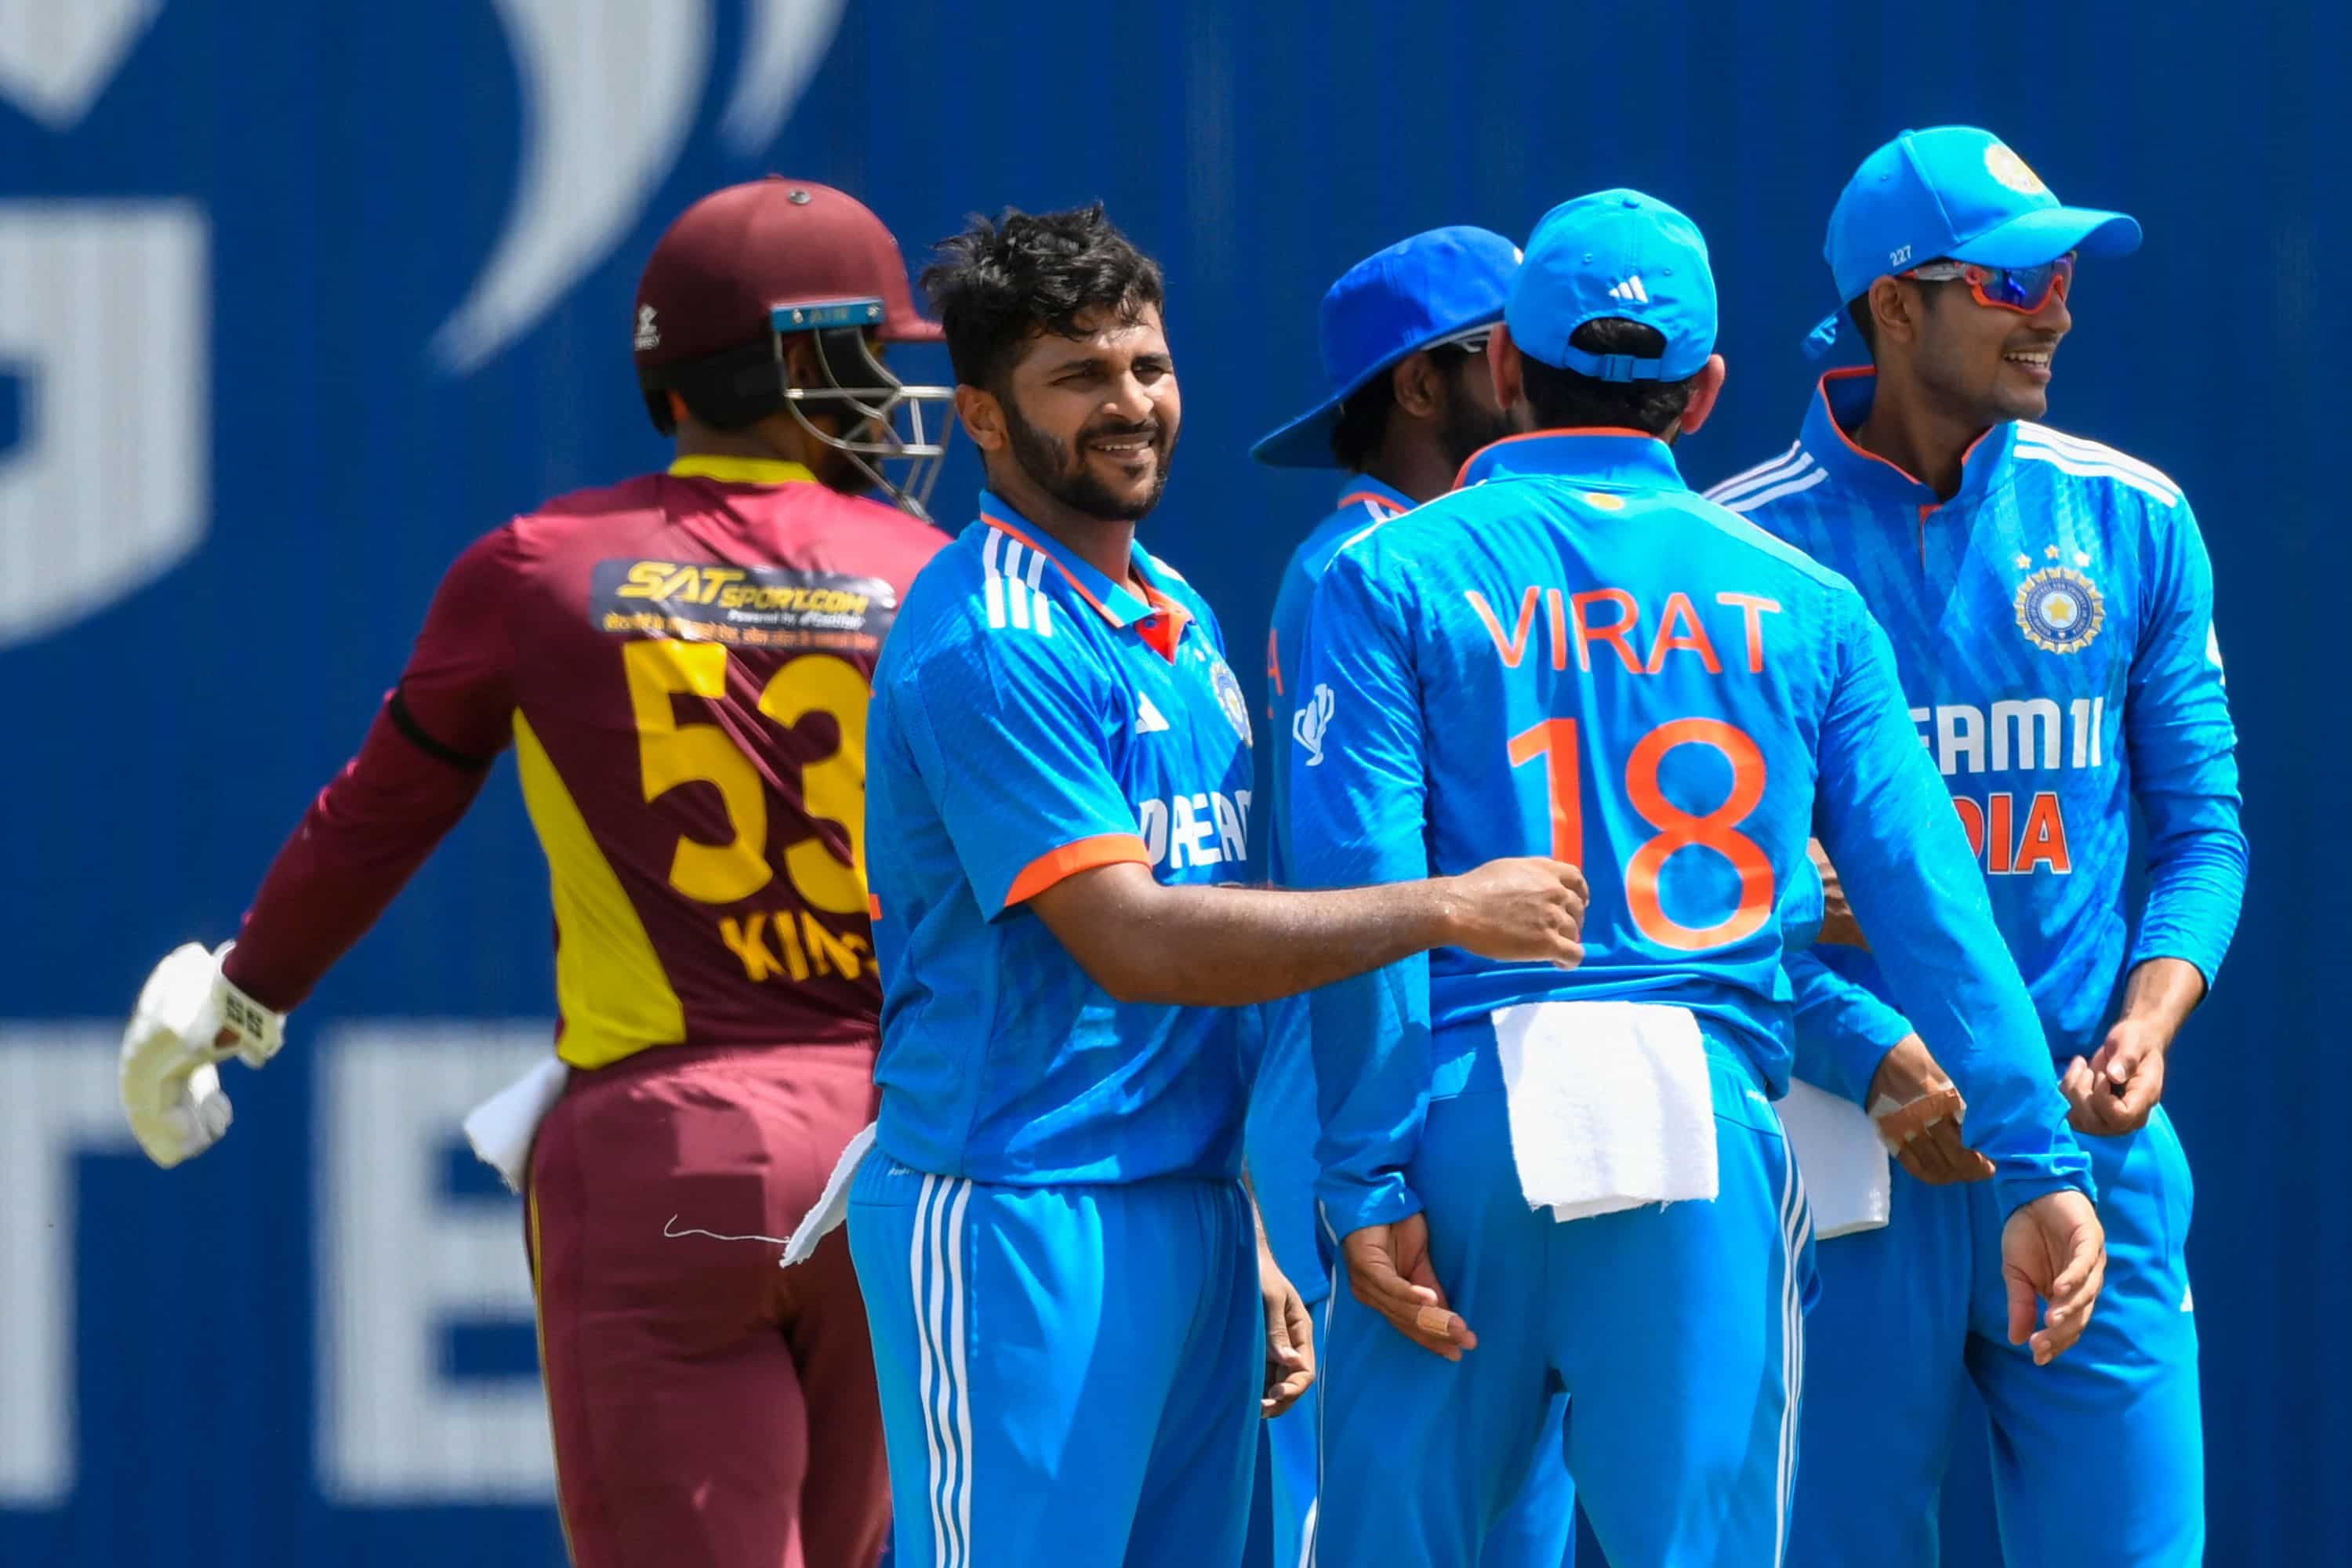 india west indies match today live